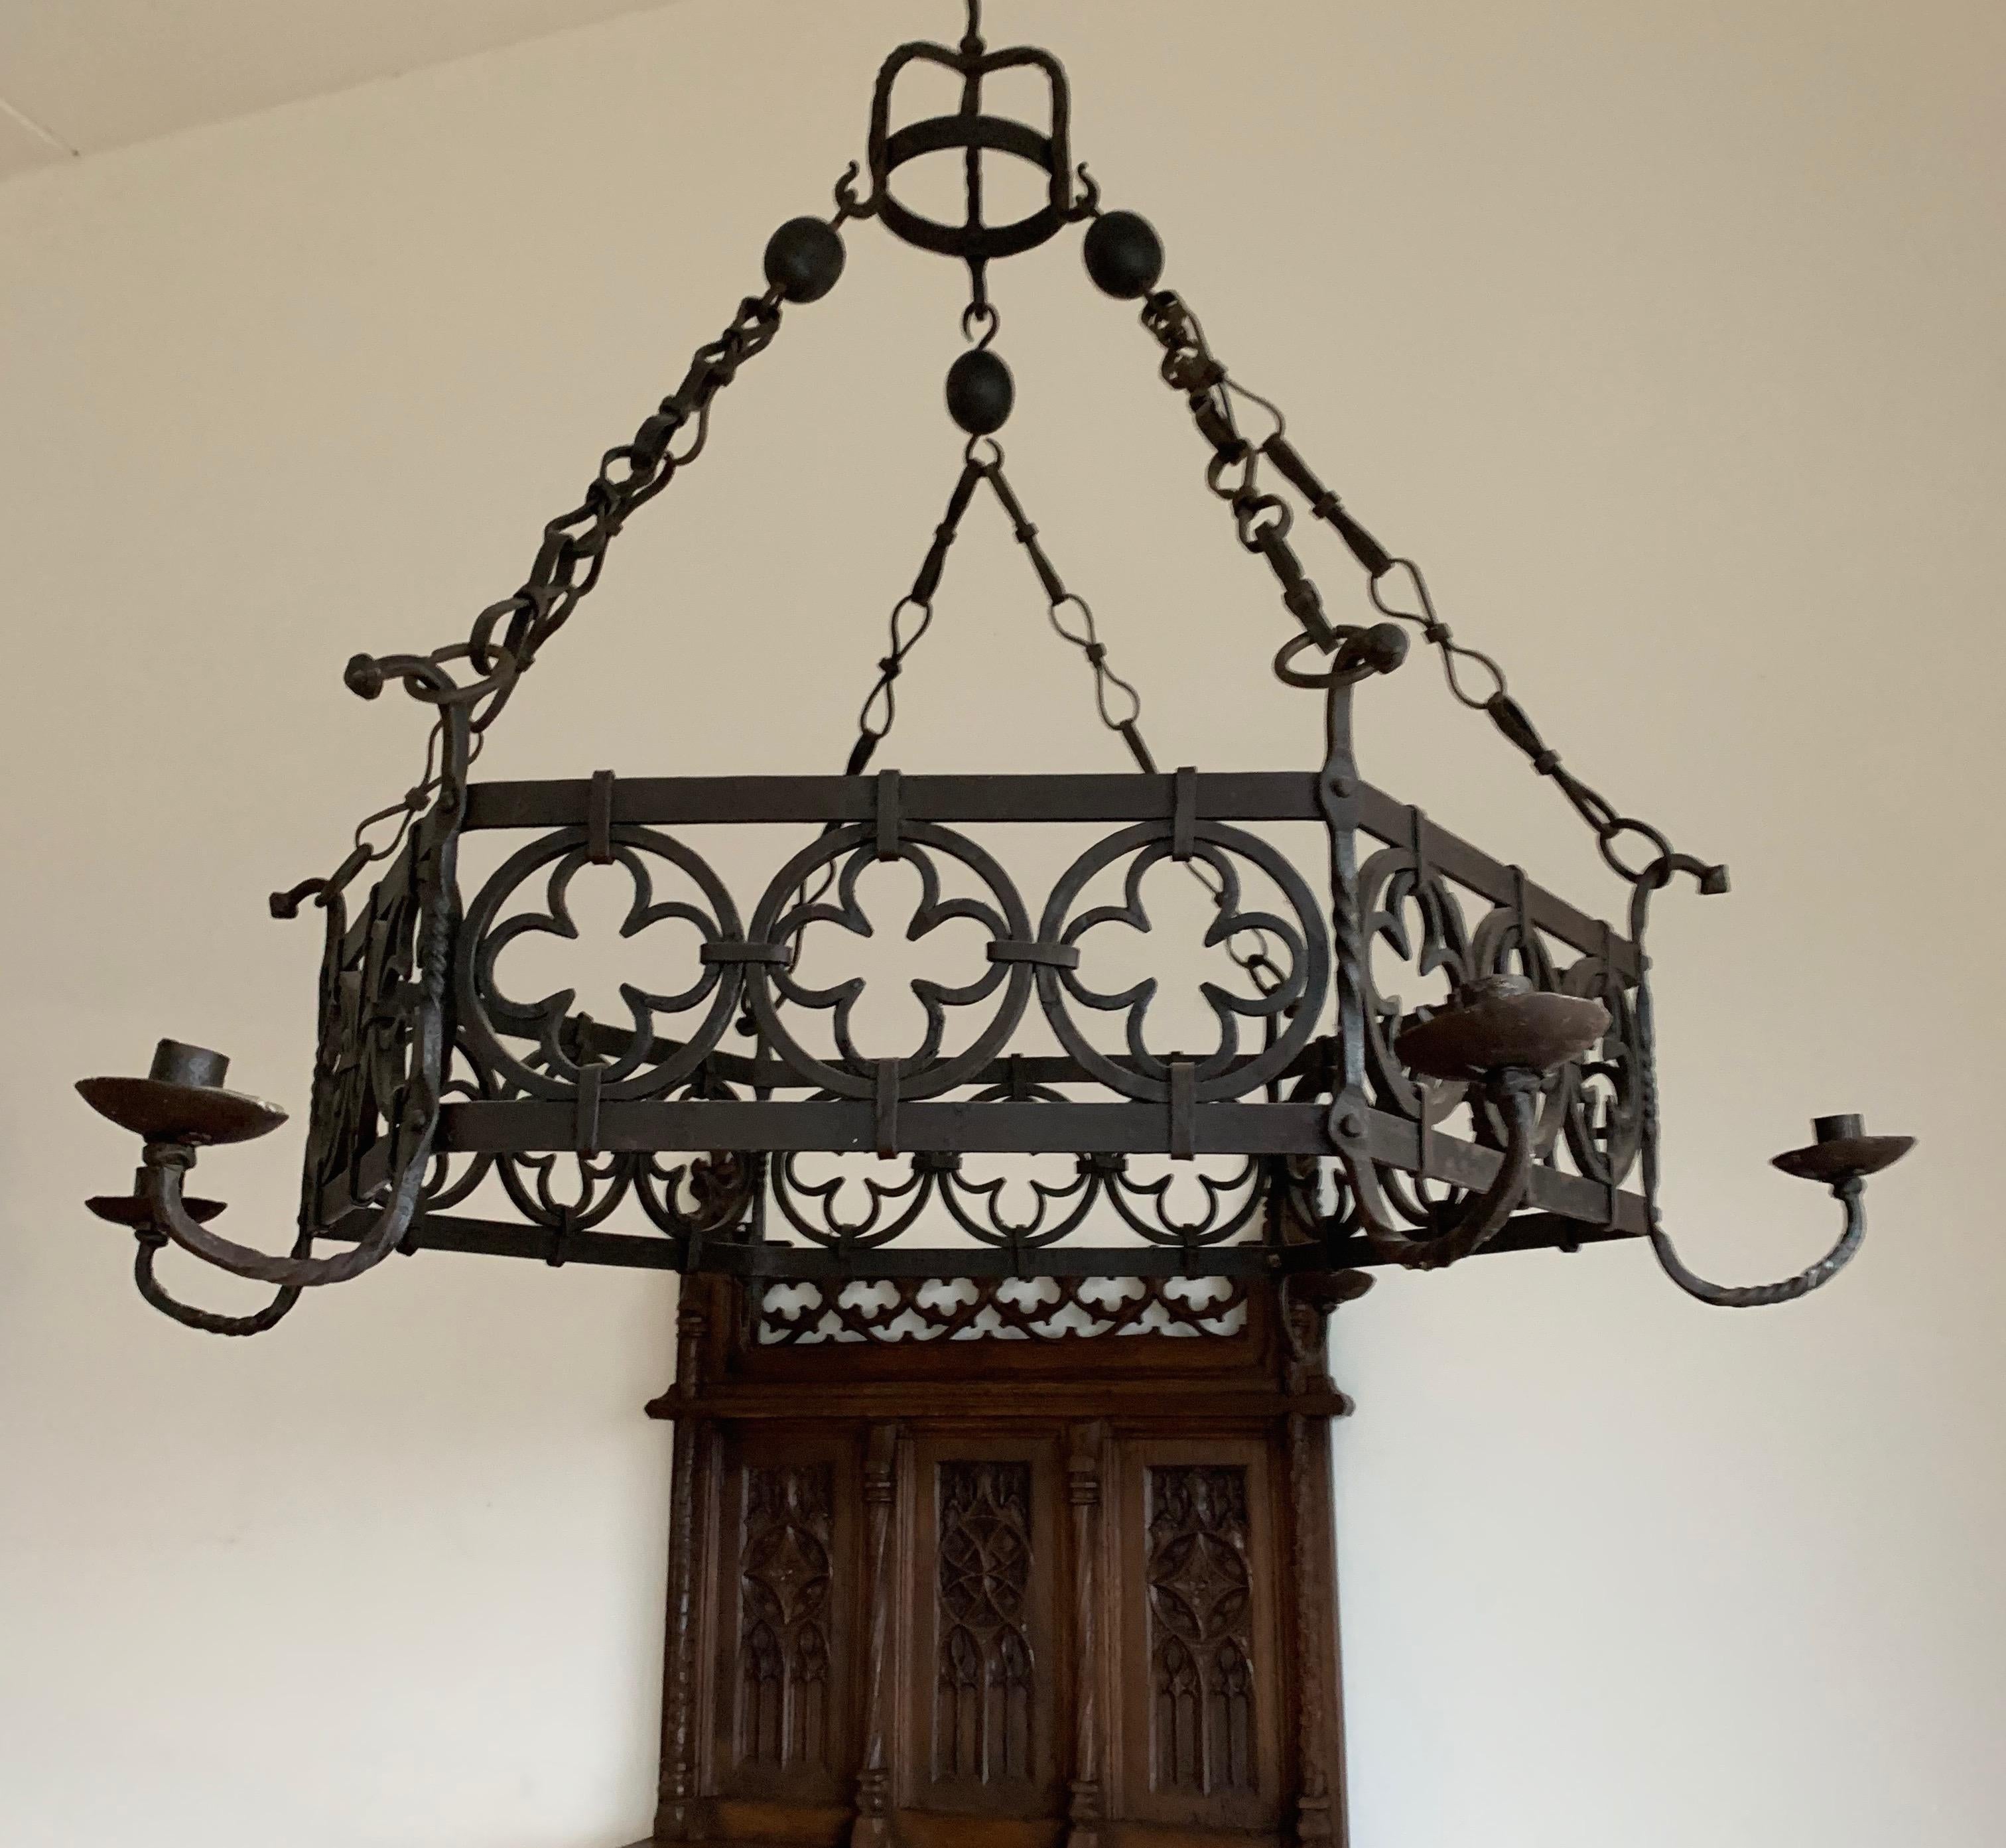 Large Gothic Revival Wrought Iron Chandelier for Dining Room / Restaurant Etc For Sale 4